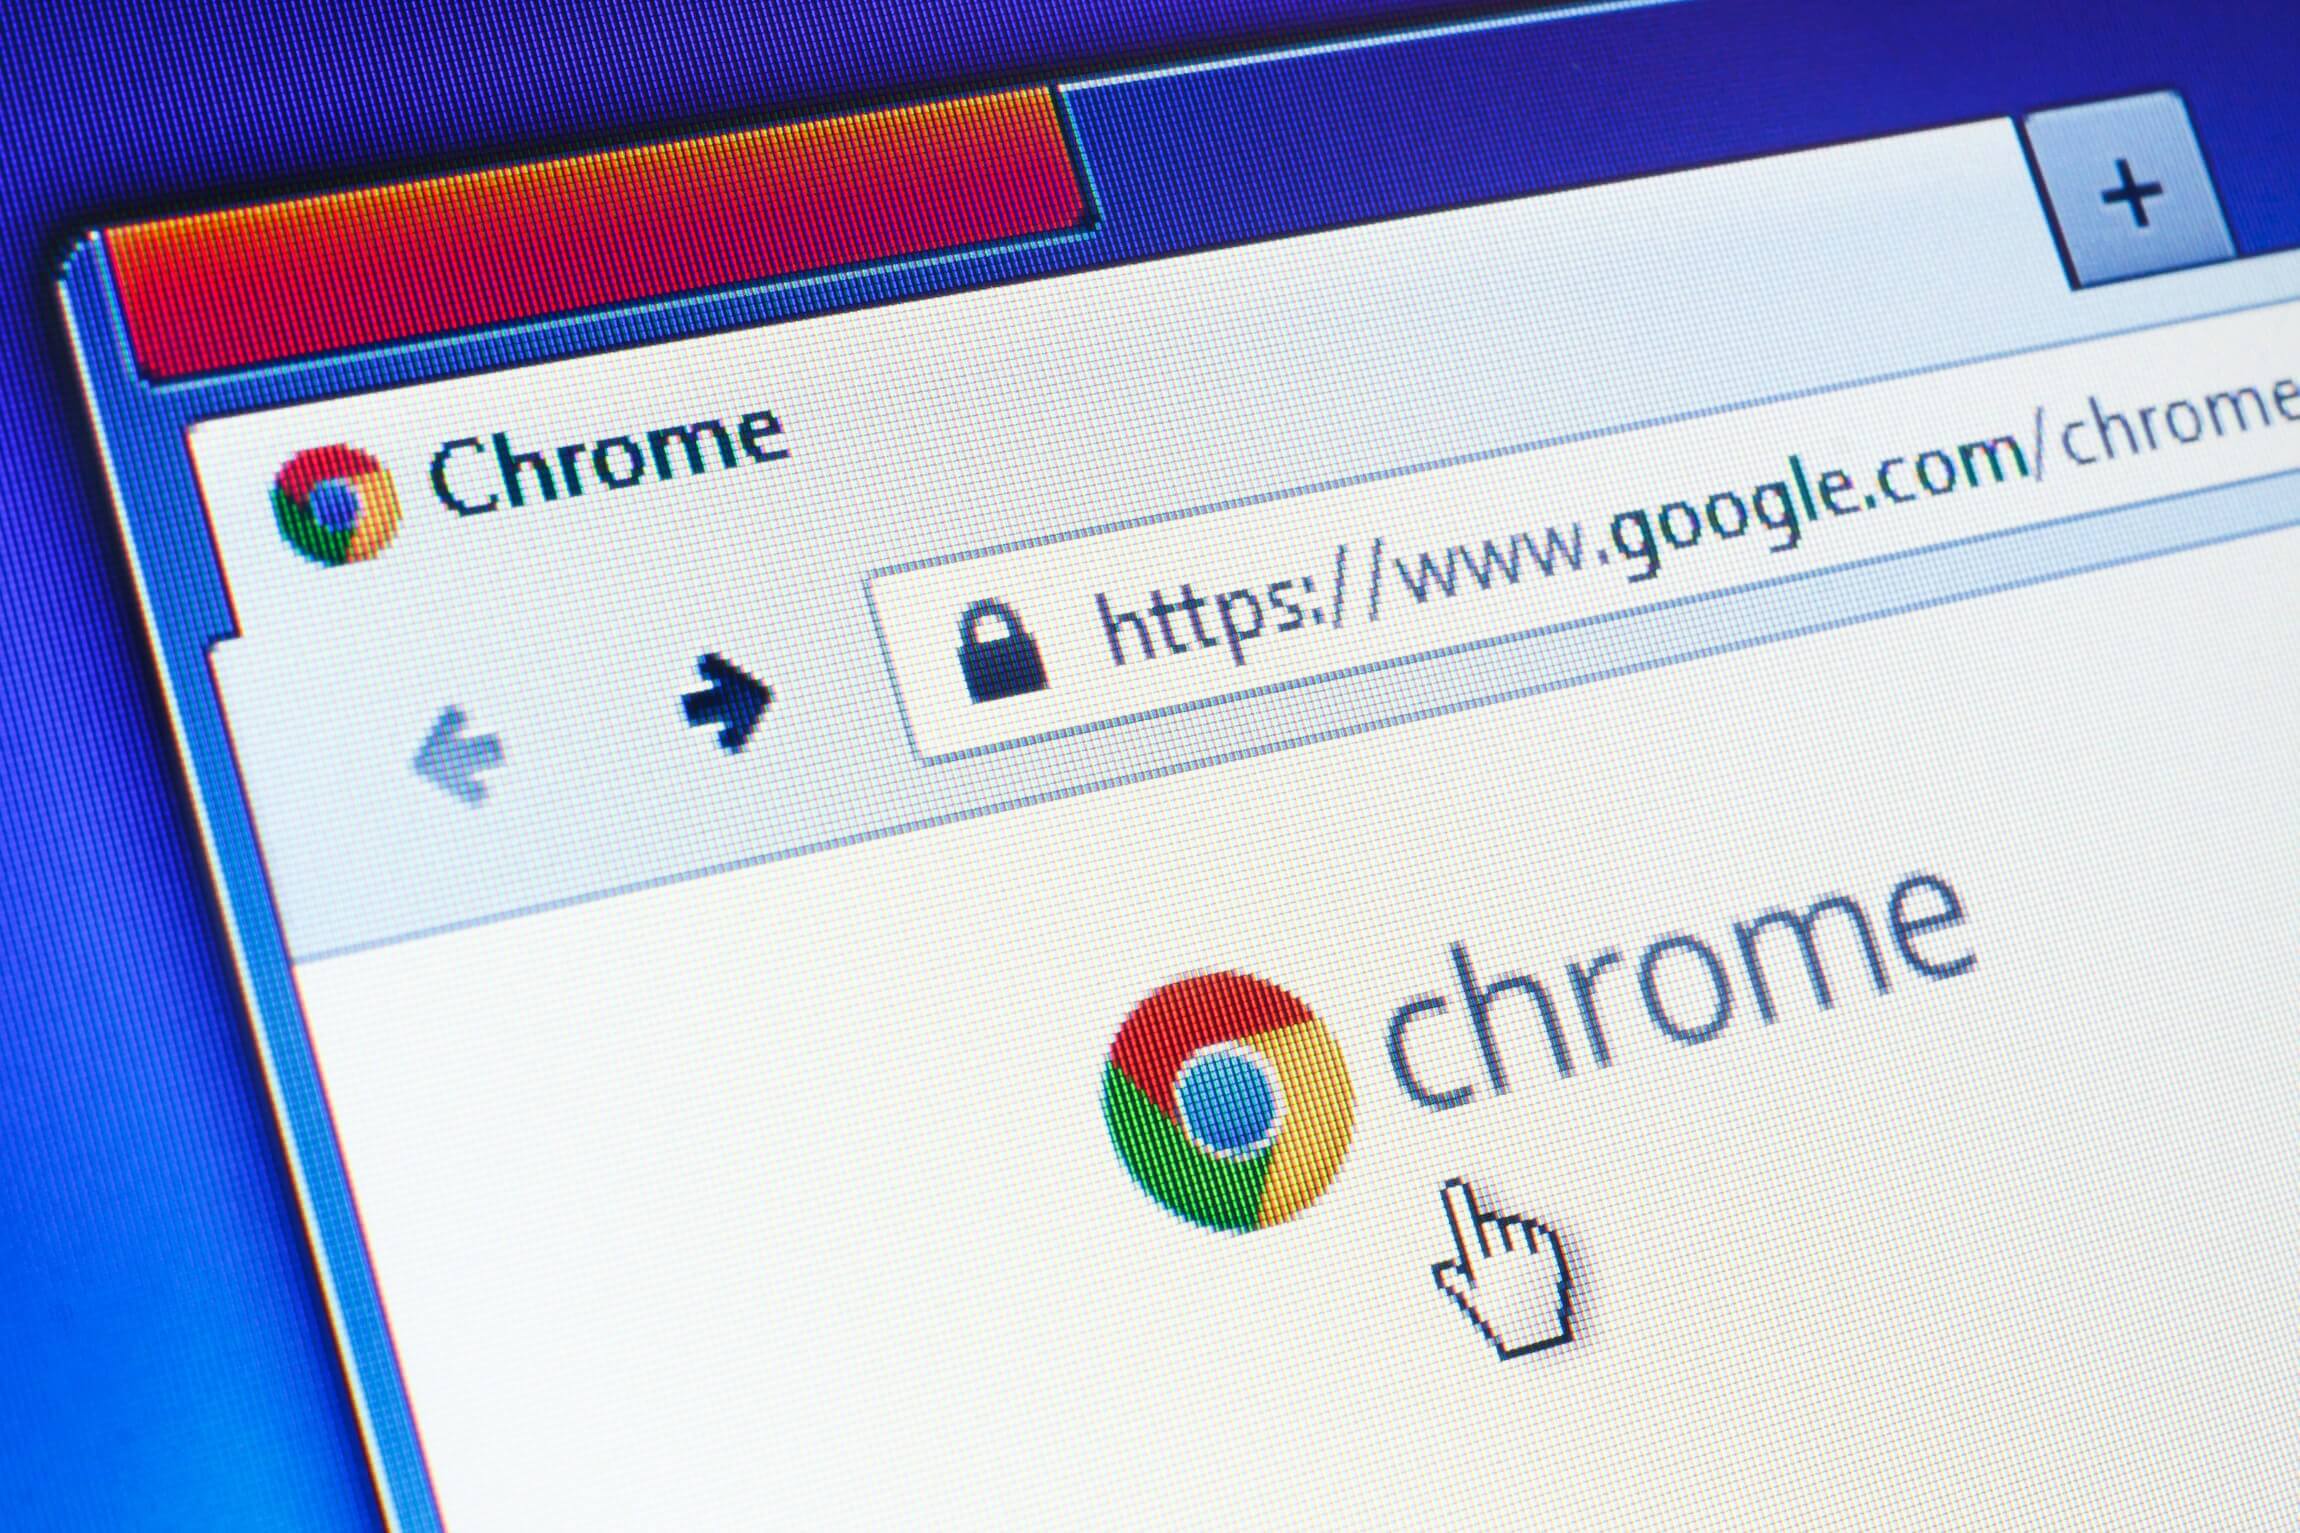 Google Chrome now targets ads based on your browser history, here's how to turn that off